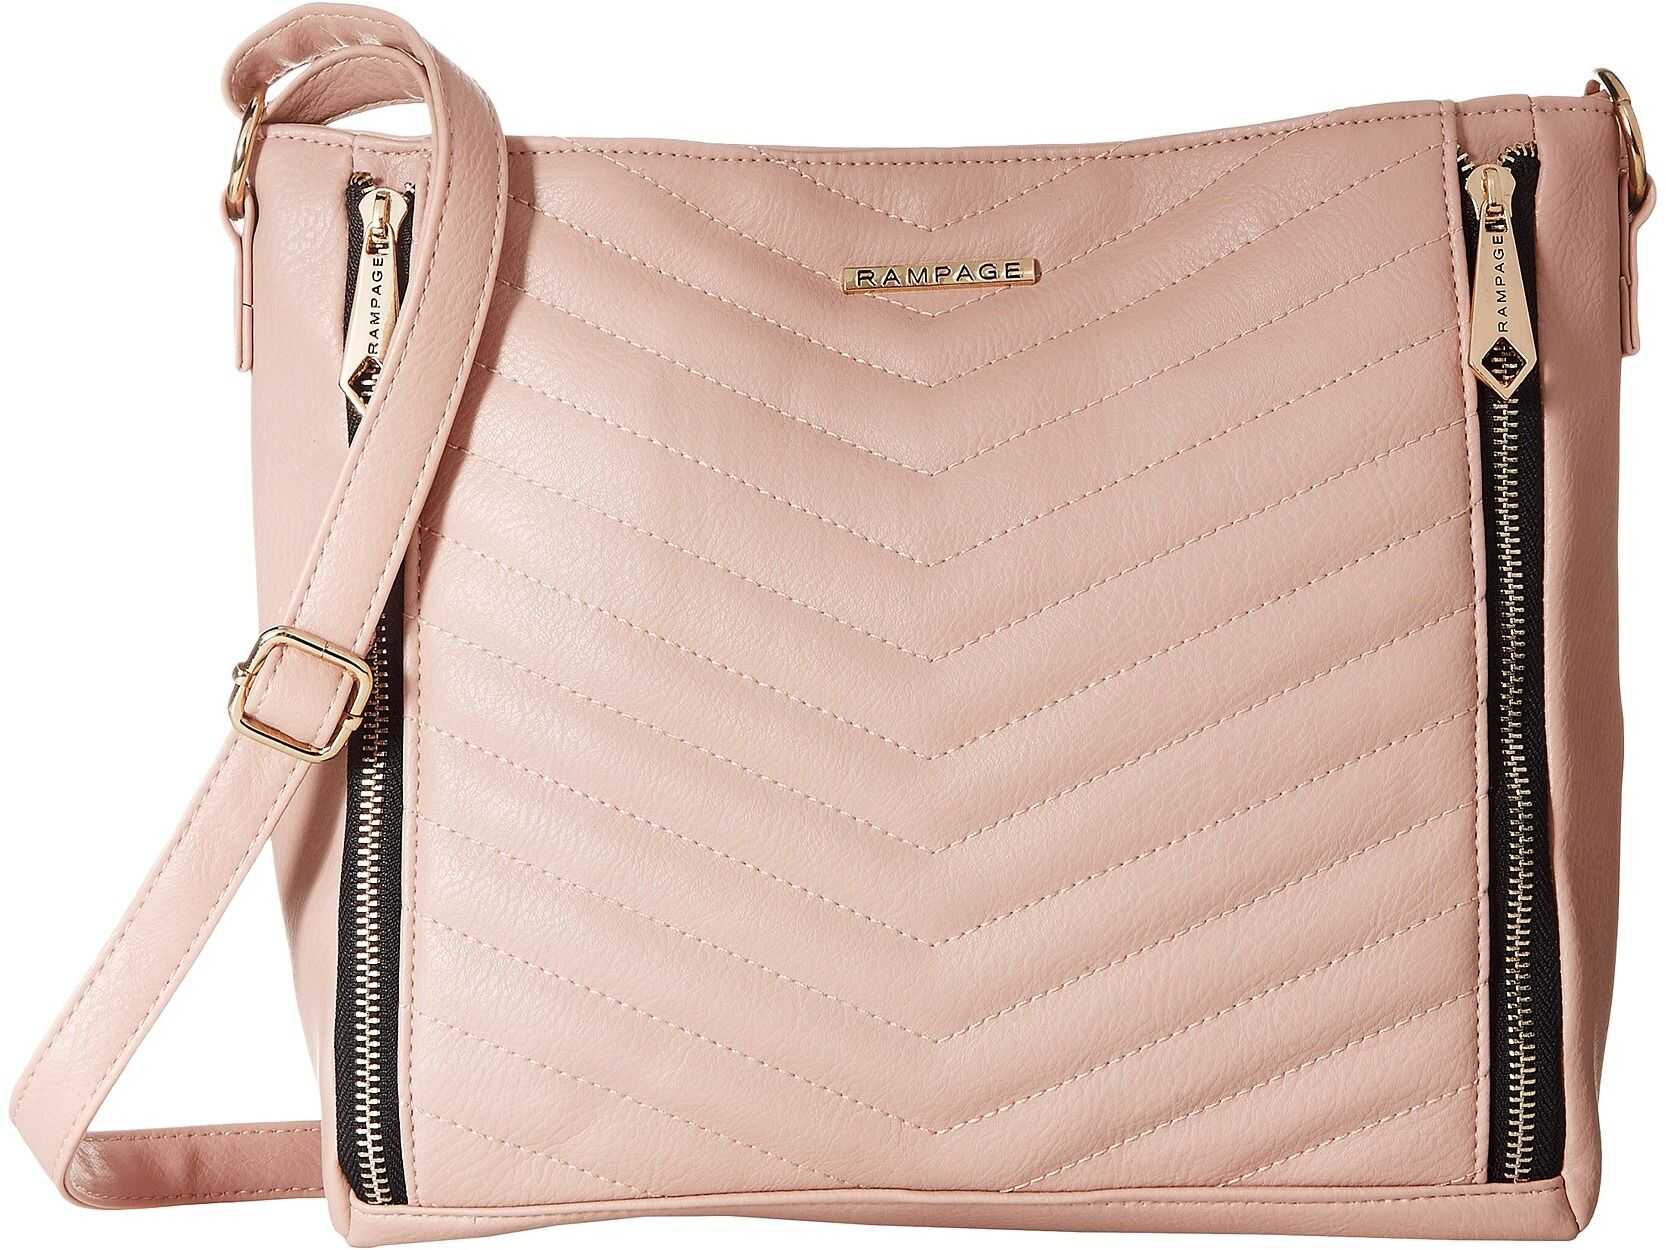 Rampage Chevron Quilted Hobo Blush